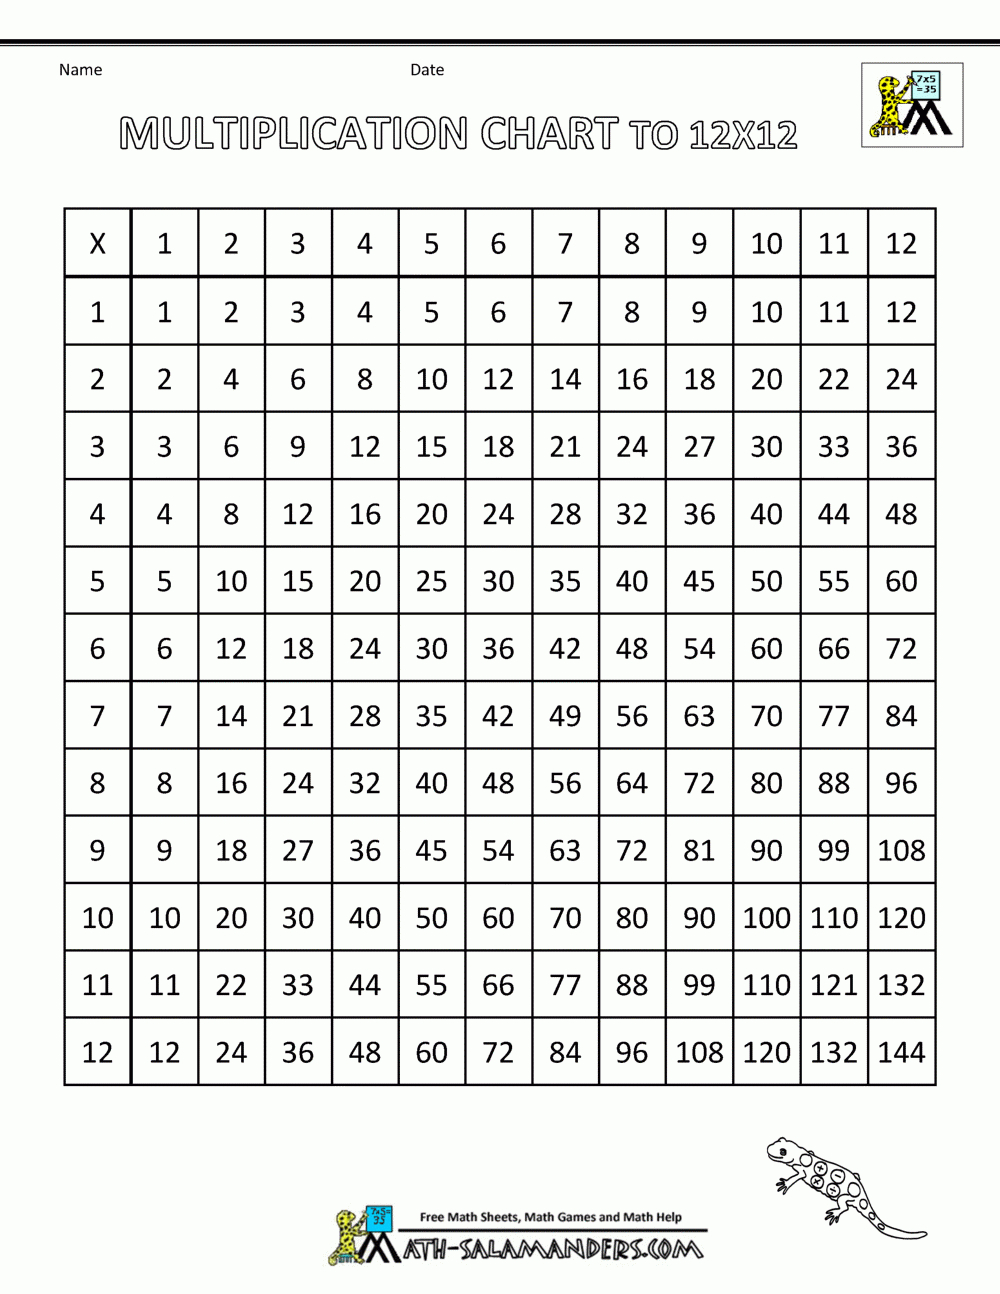 Times Table Grid To 12X12 intended for Printable Multiplication Table Up To 12